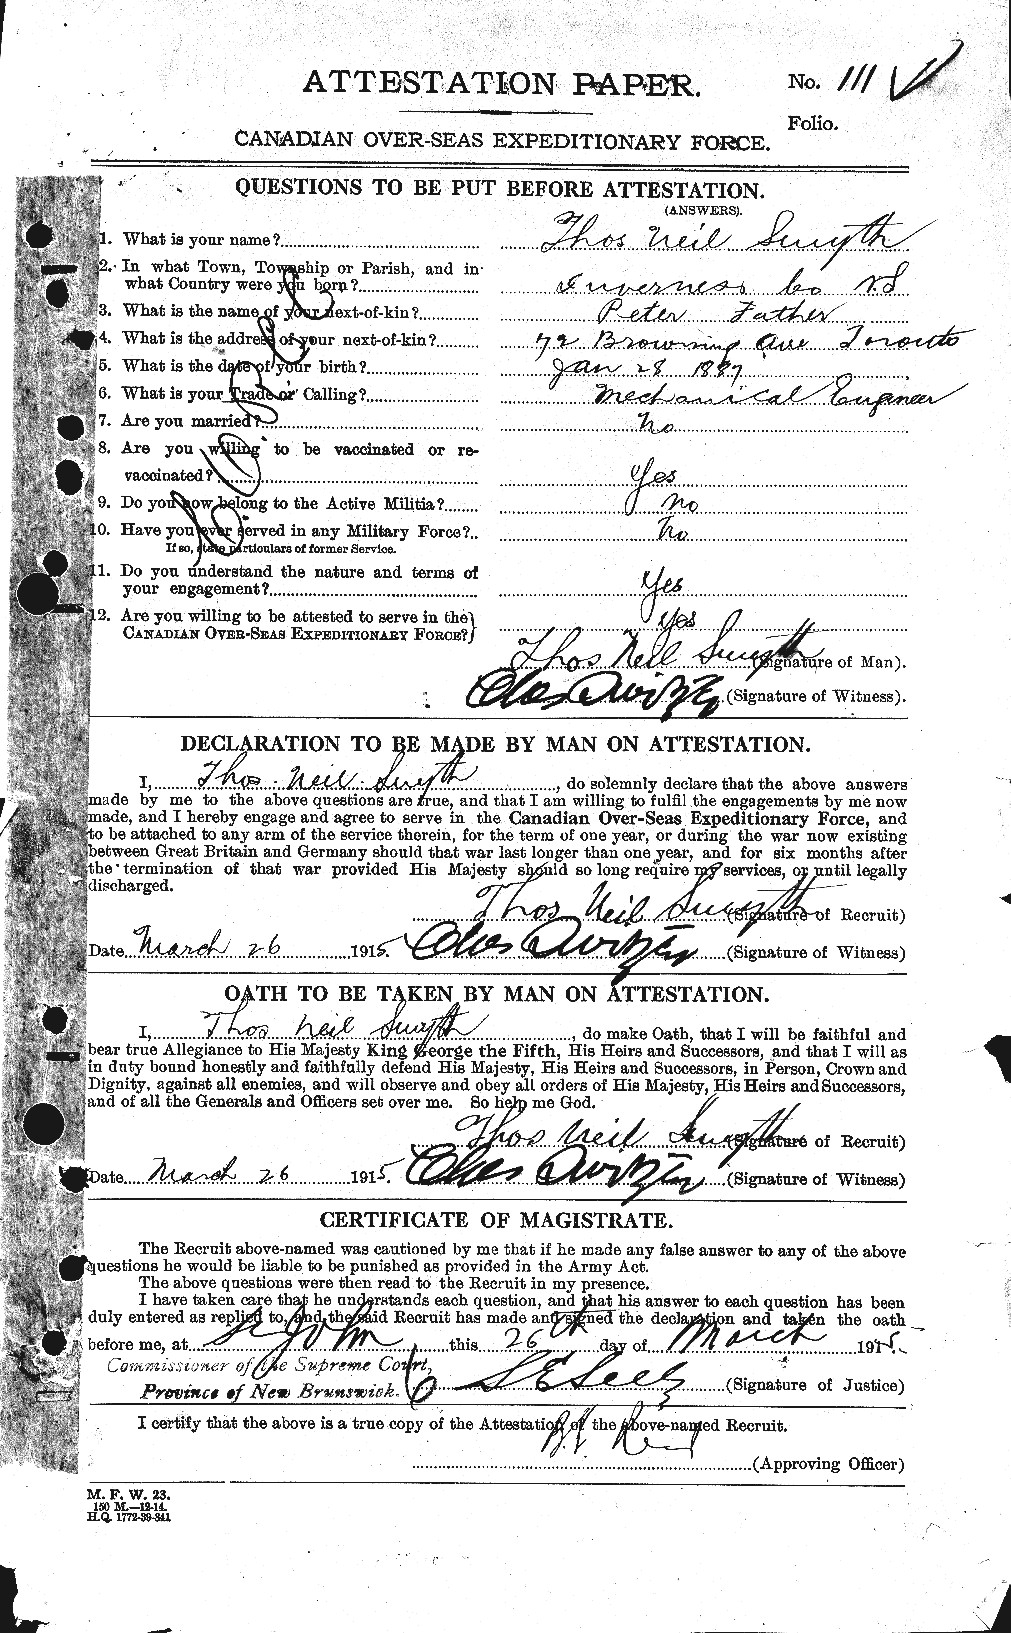 Personnel Records of the First World War - CEF 106058a